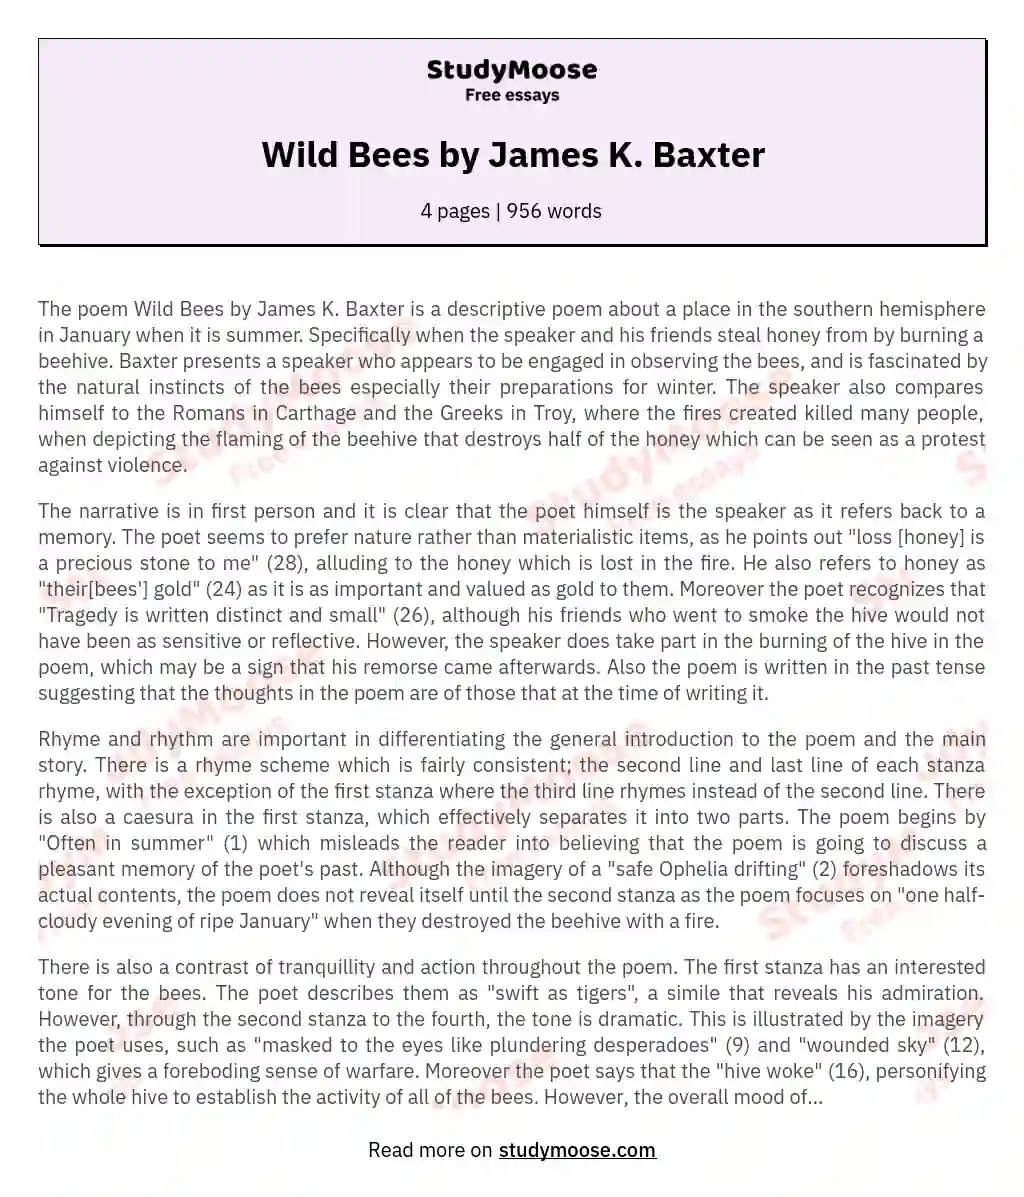 Wild Bees by James K. Baxter essay